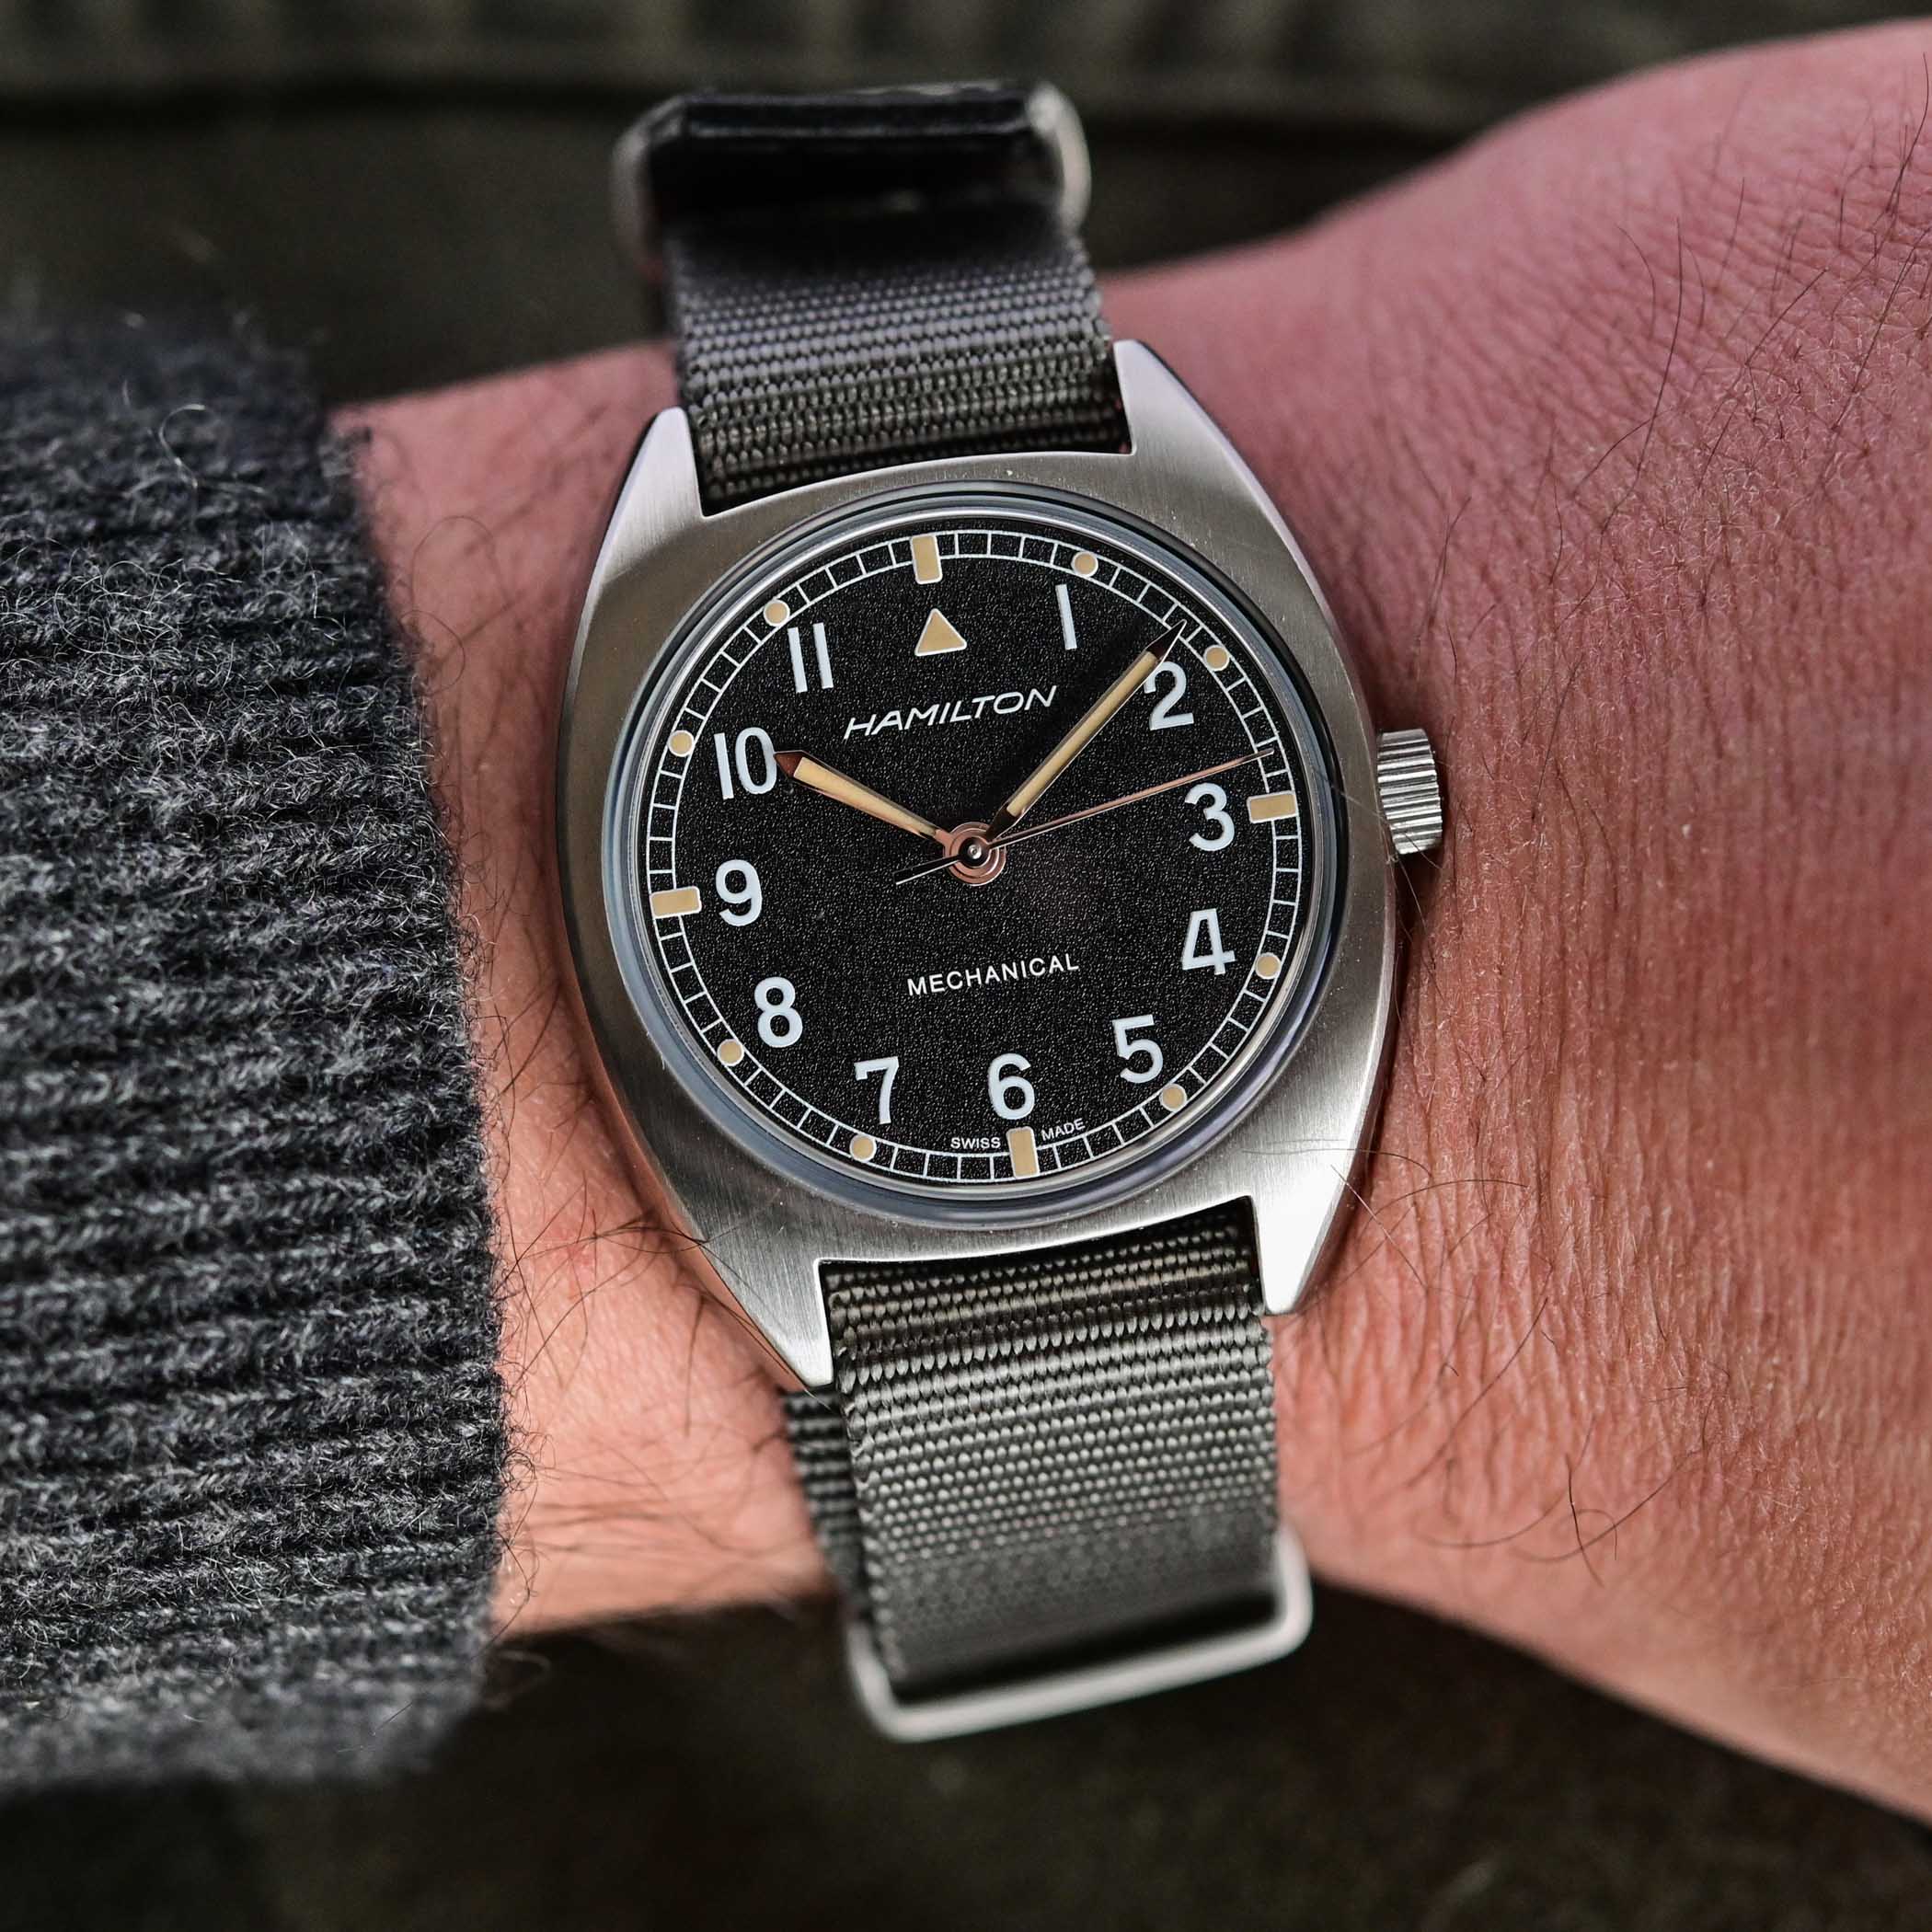 battle of accessible British military-inspired watches - comparative review Hamilton Khaki Pilot Pioneer Mechanical versus Timor Heritage Field - 1